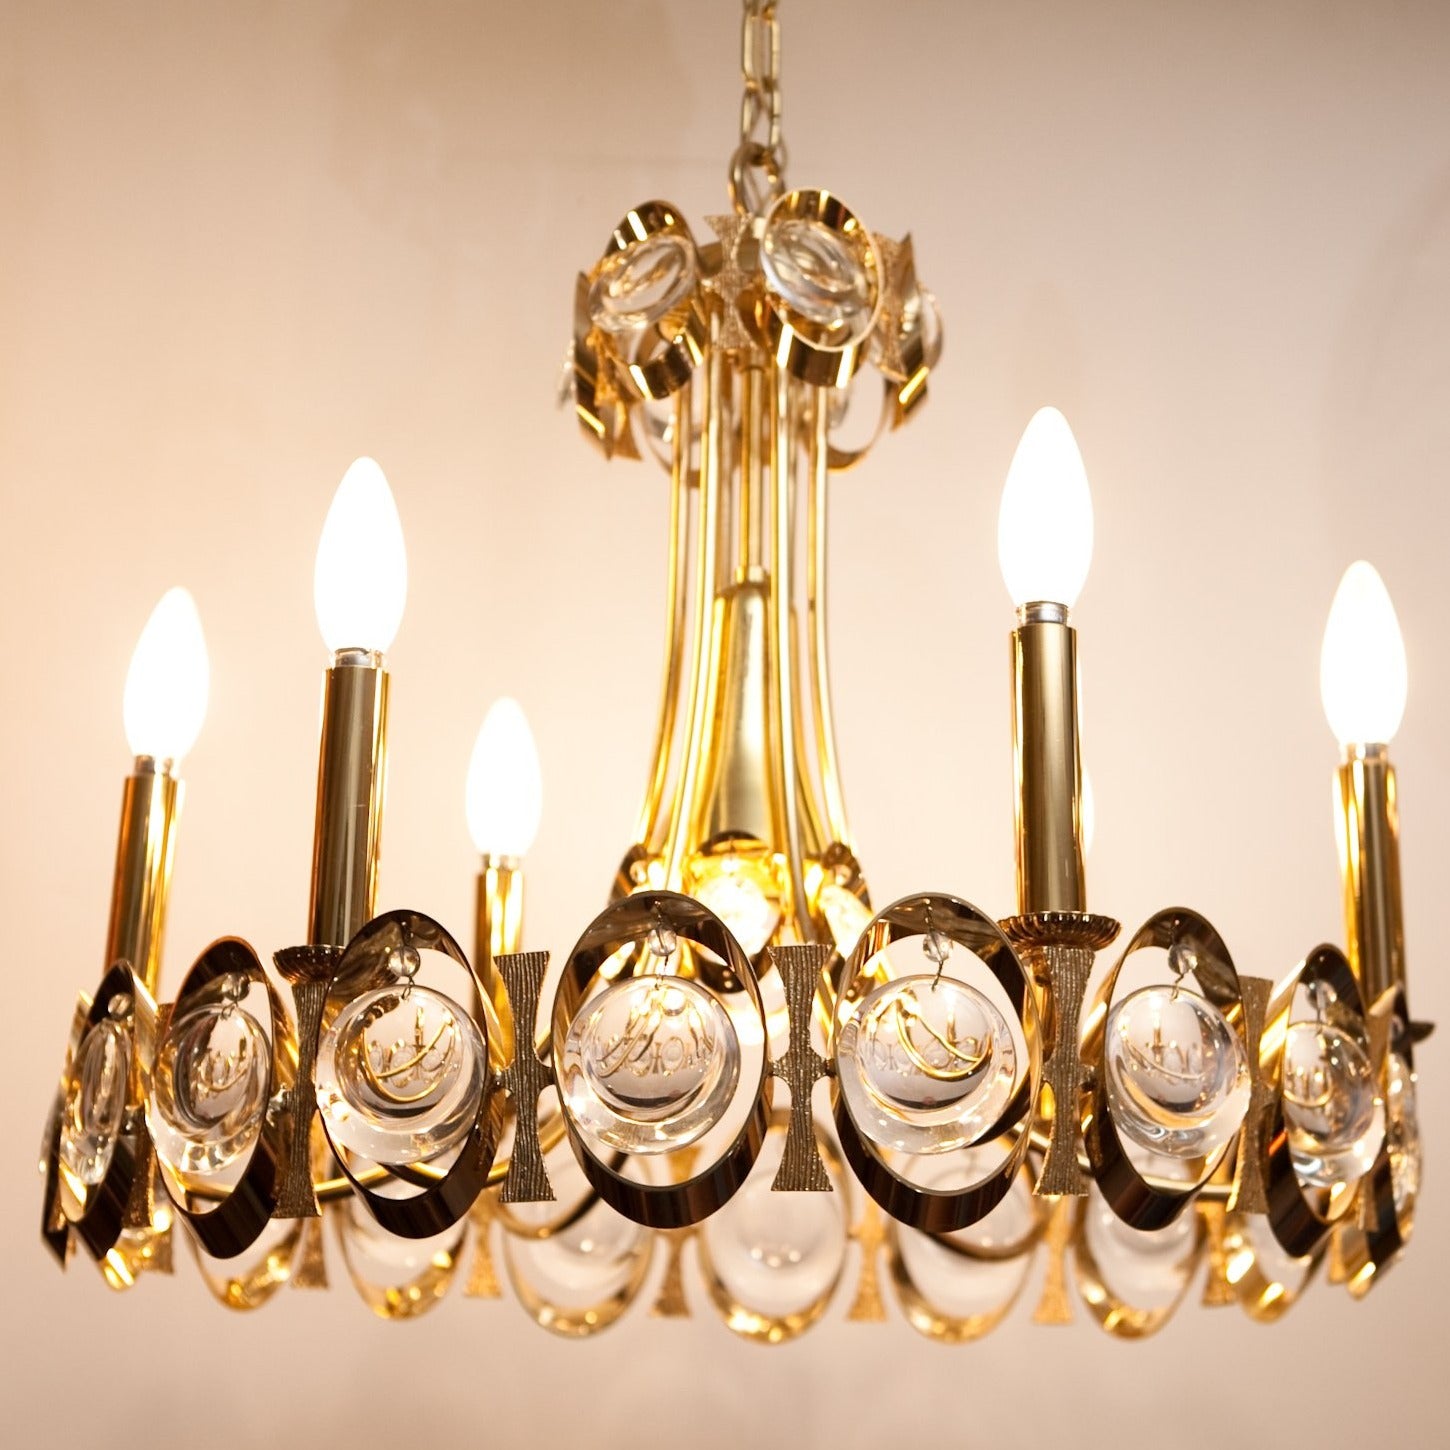 Absolutely Stunning Vintage Chandelier by Palwa of Germany – The Fab Pad